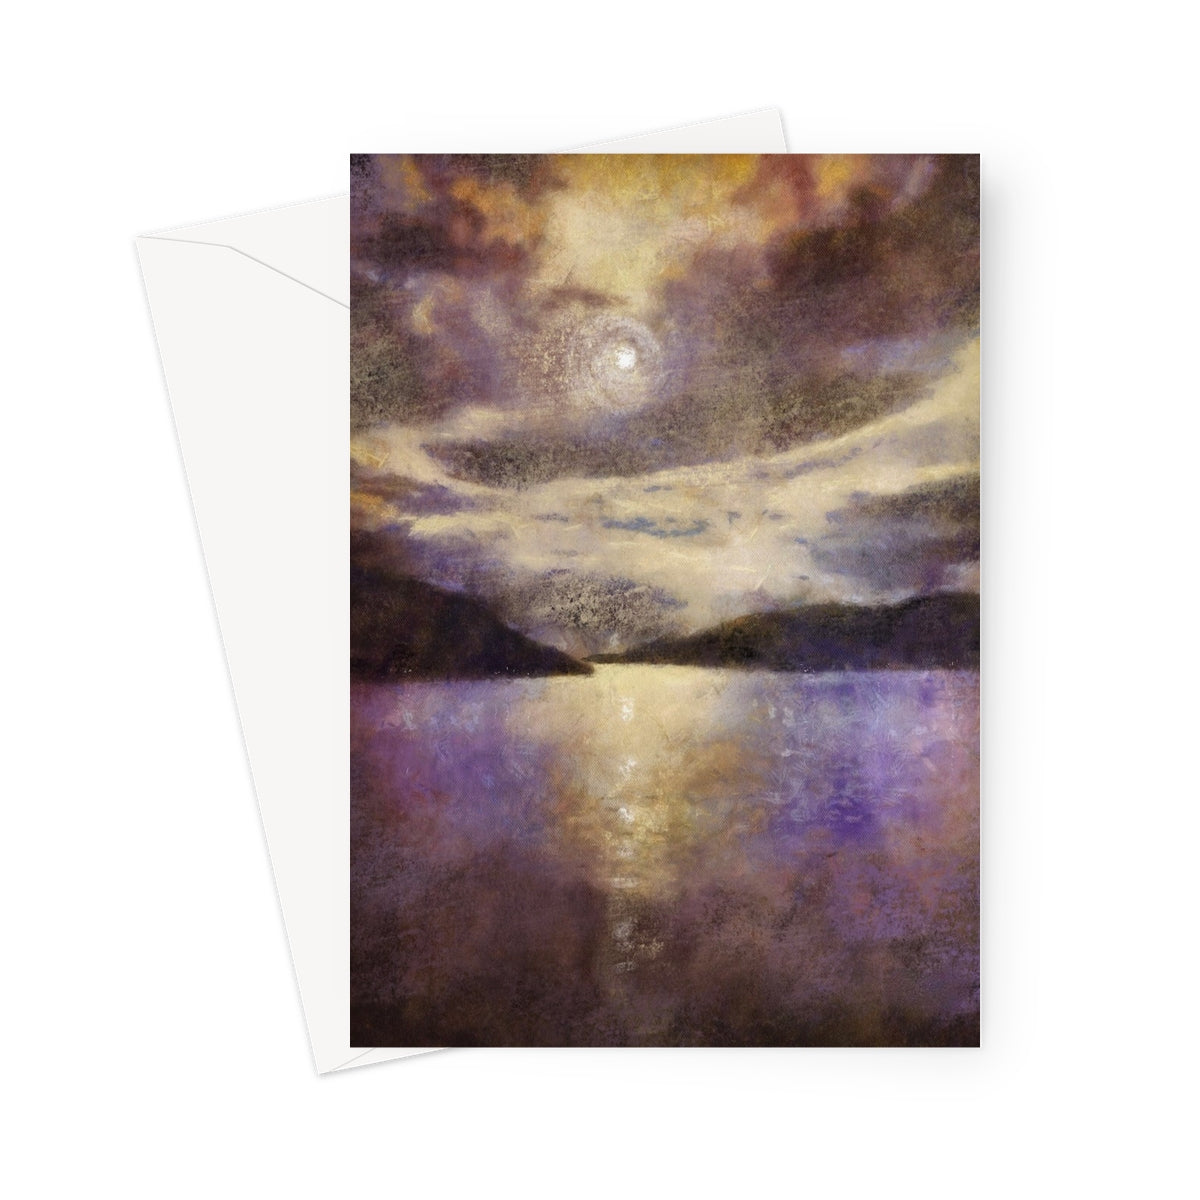 Moonlight Meets Lewis & Harris Art Gifts Greeting Card-Greetings Cards-Hebridean Islands Art Gallery-5"x7"-1 Card-Paintings, Prints, Homeware, Art Gifts From Scotland By Scottish Artist Kevin Hunter